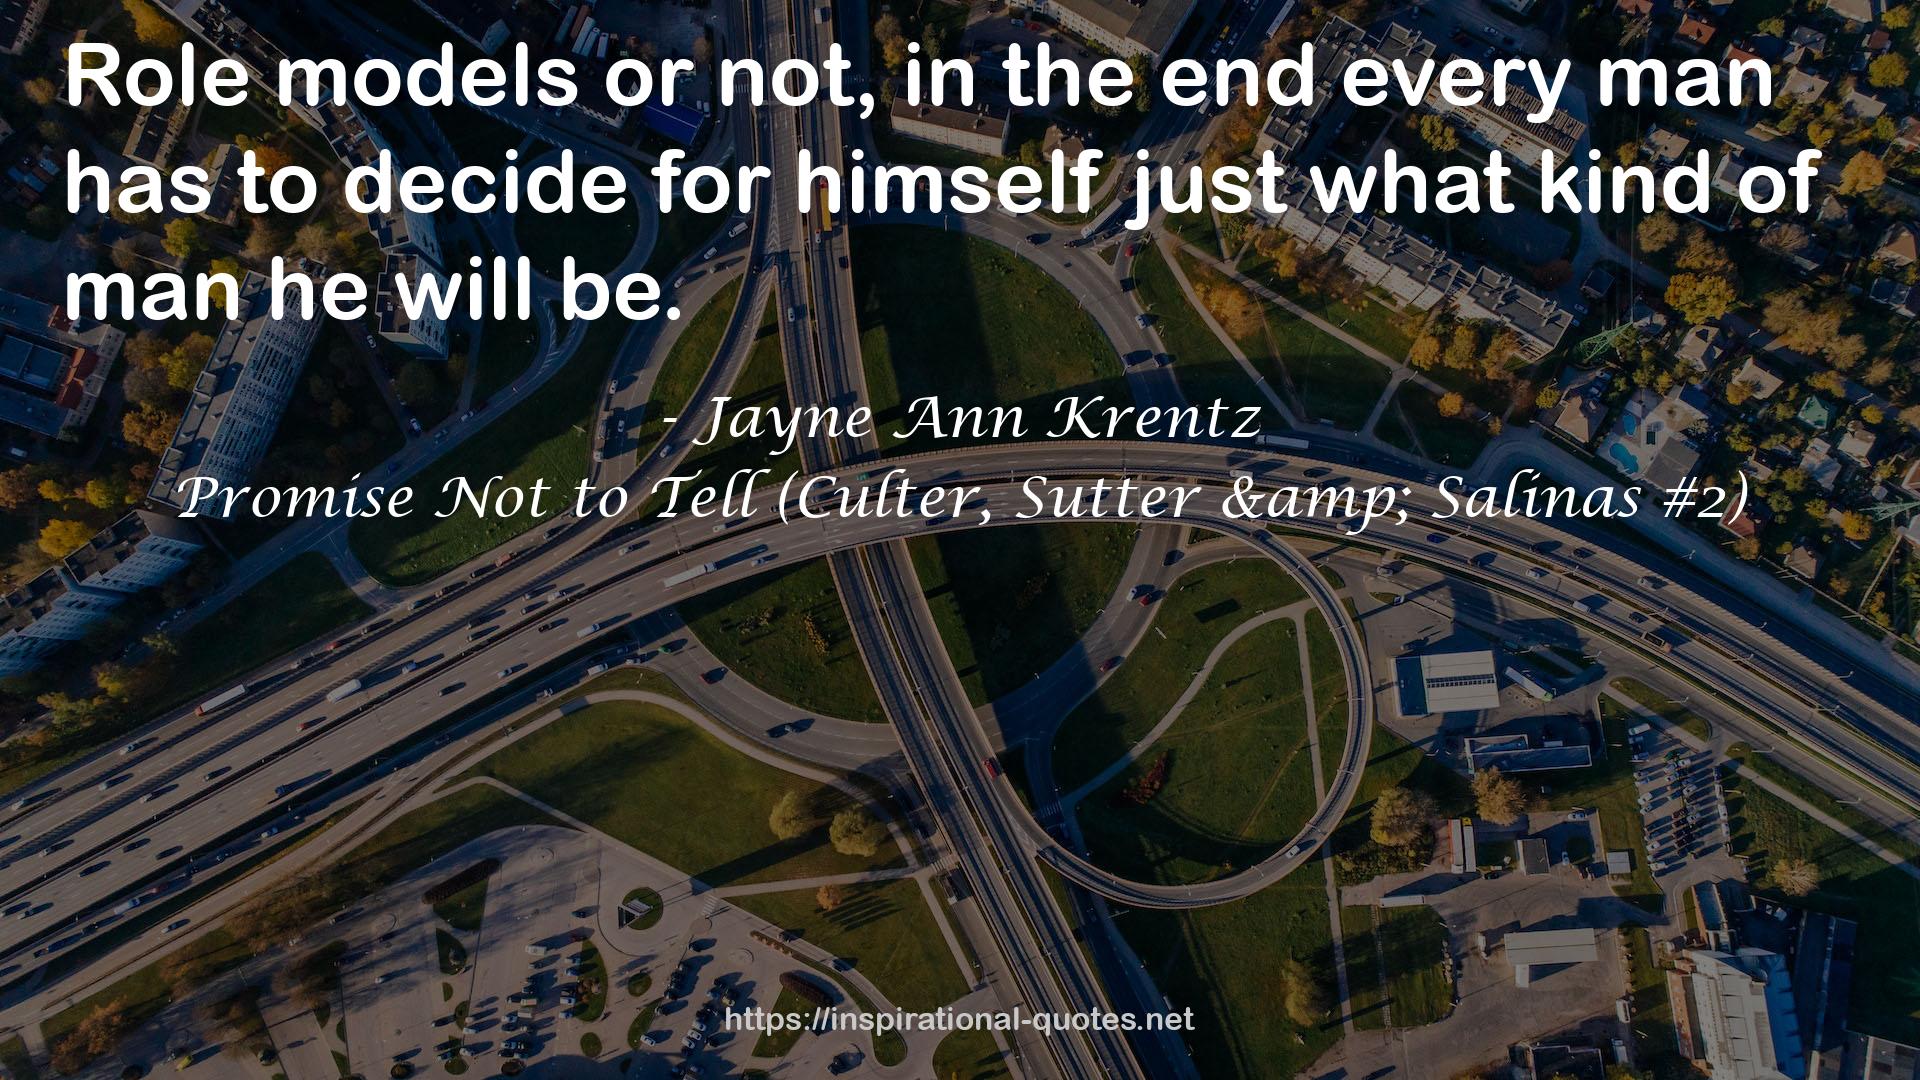 Promise Not to Tell (Culter, Sutter & Salinas #2) QUOTES